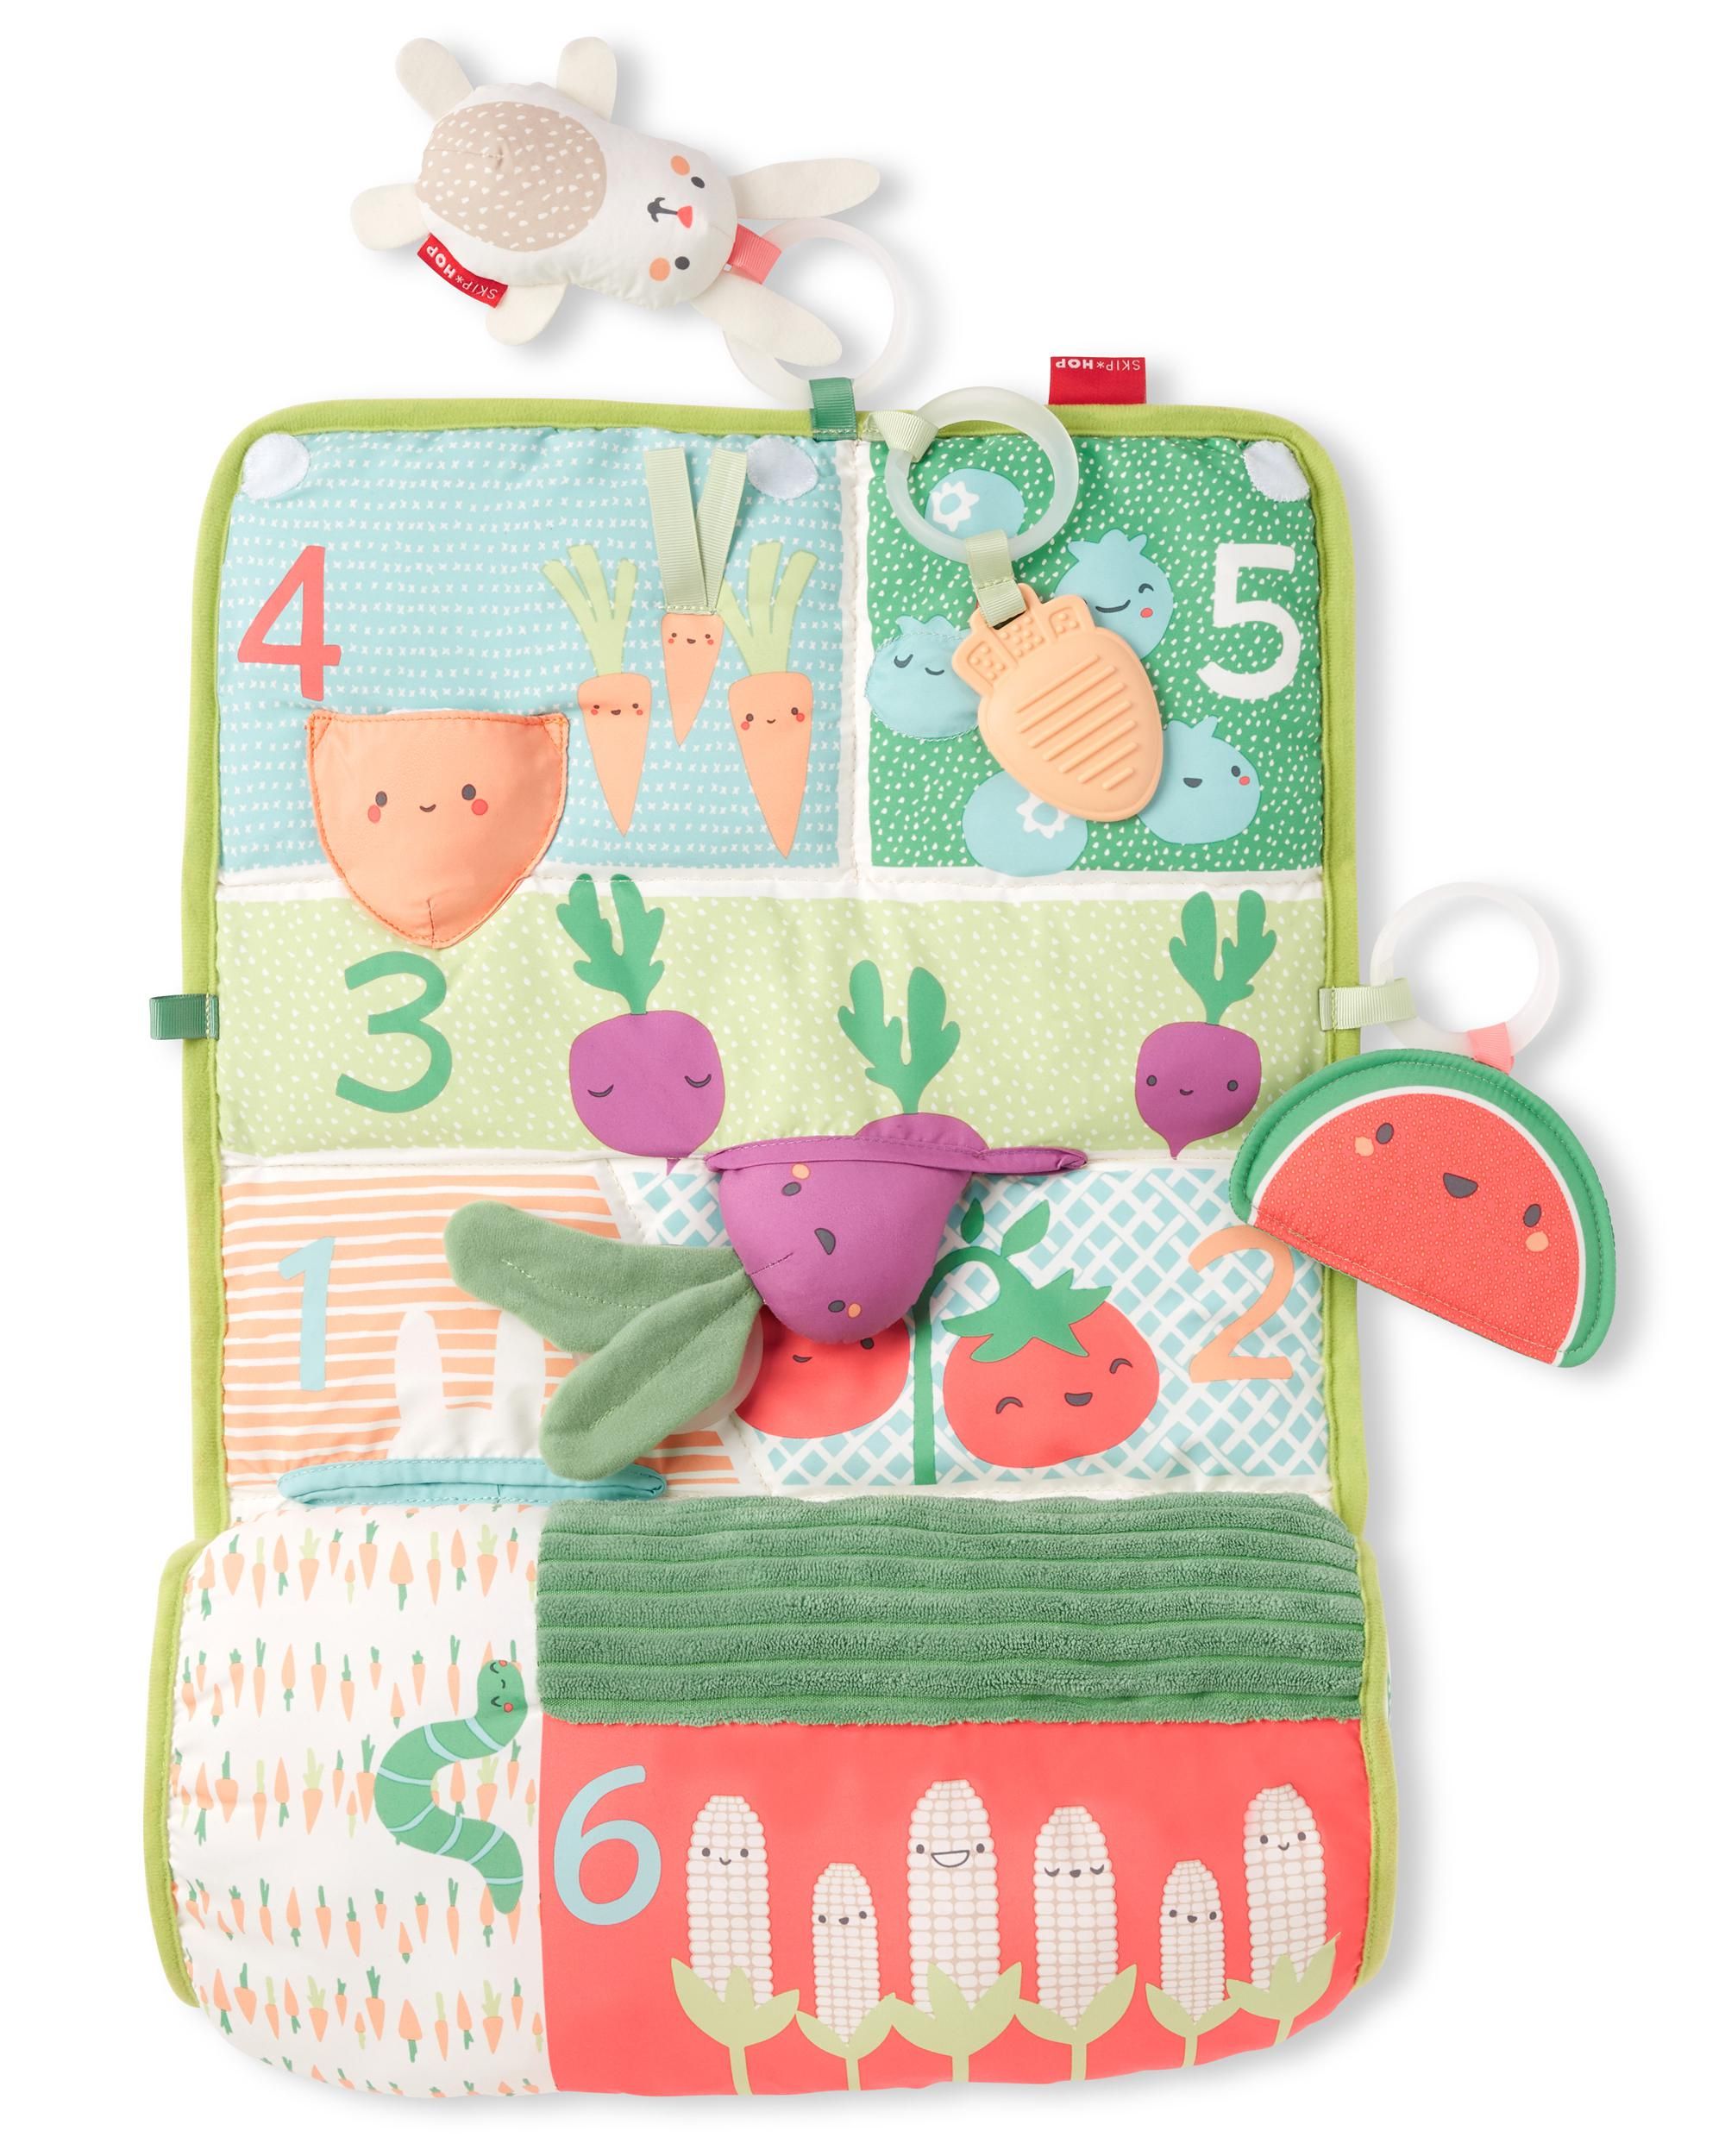 Farmstand Tummy Time Playmat | Carter's